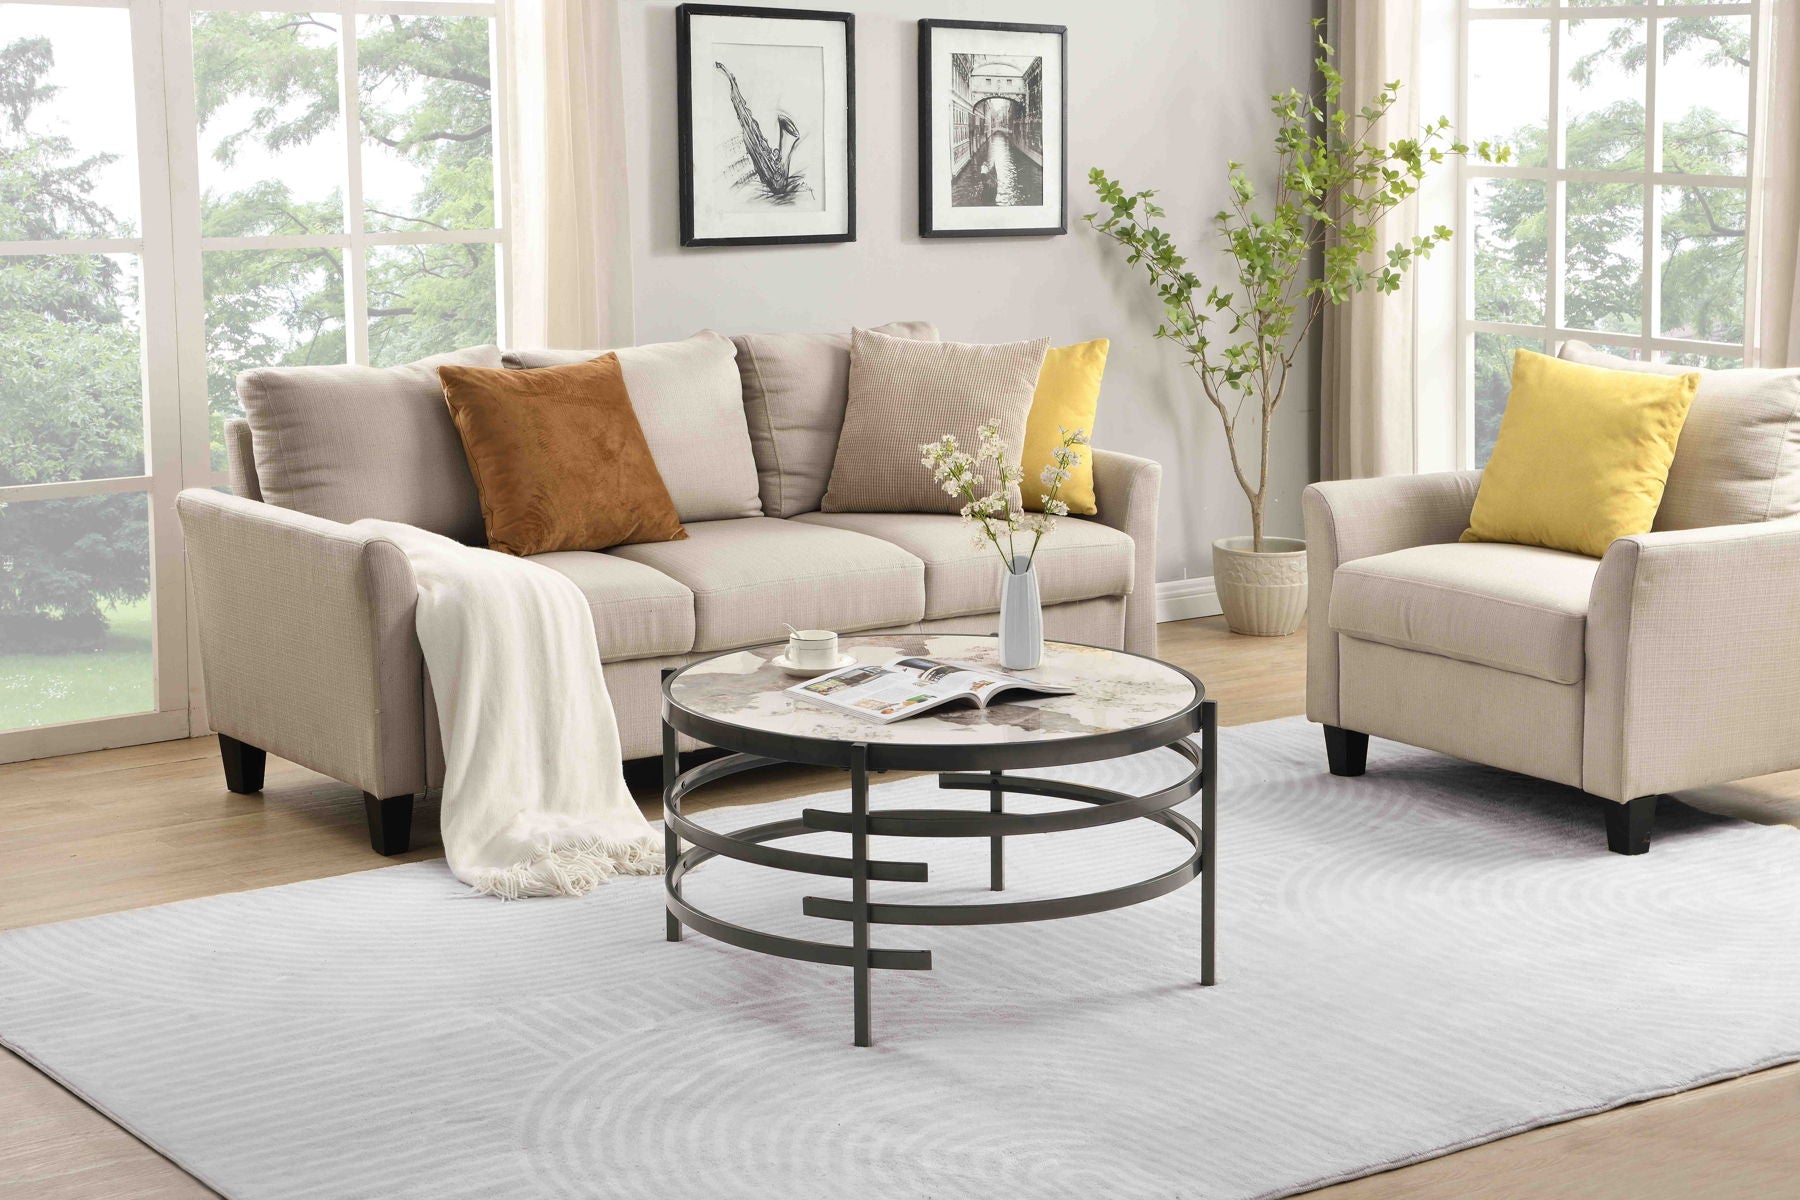 Round Coffee Table With Sintered Stone Top&Sturdy Metal Frame, Modern Coffee Table For Living Room, Darker Gray